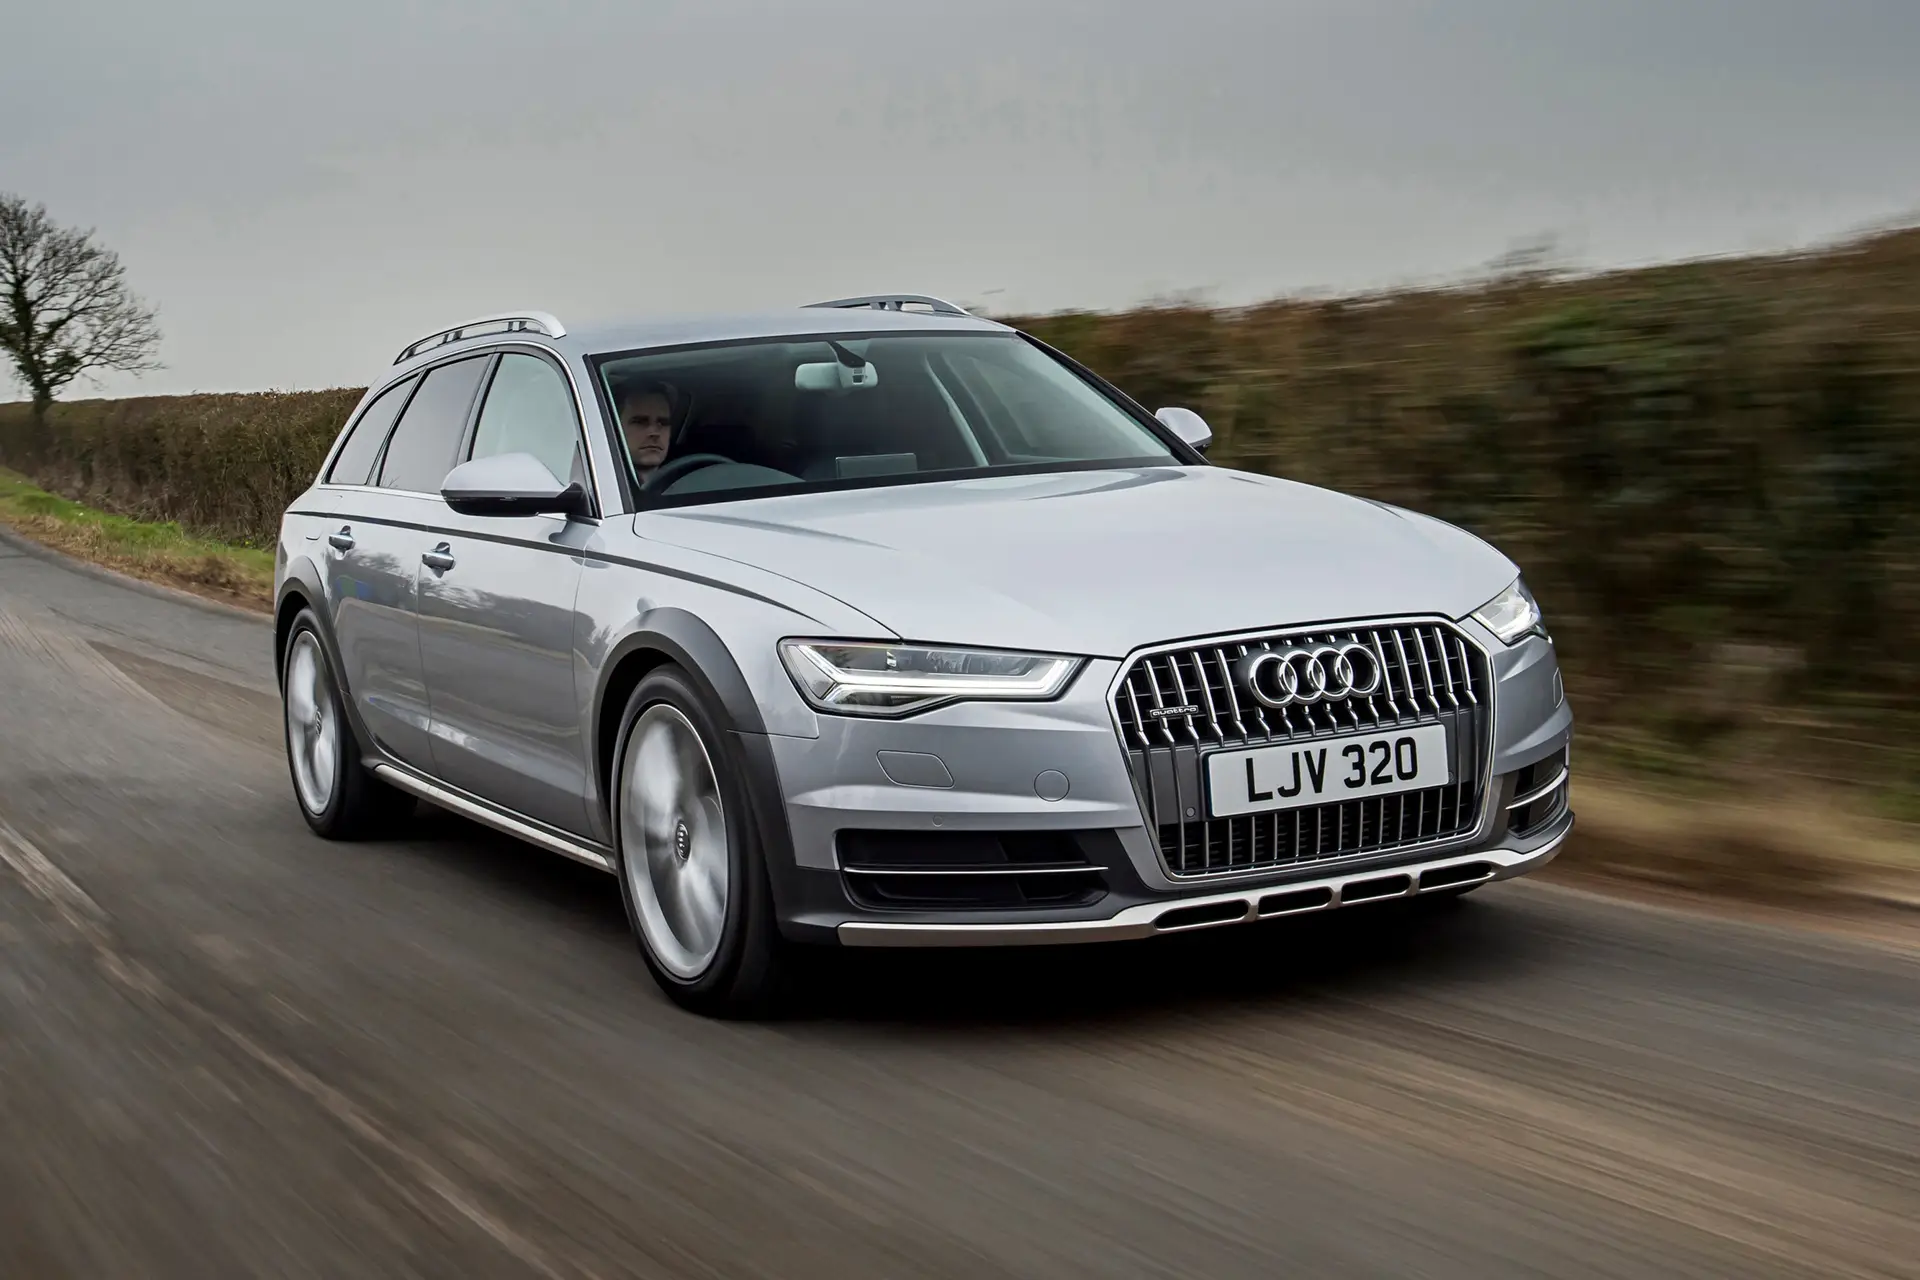 Audi A6 Allroad (2012-2018) Review: Exterior front three quarter photo of the Audi A6 Allroad on the road